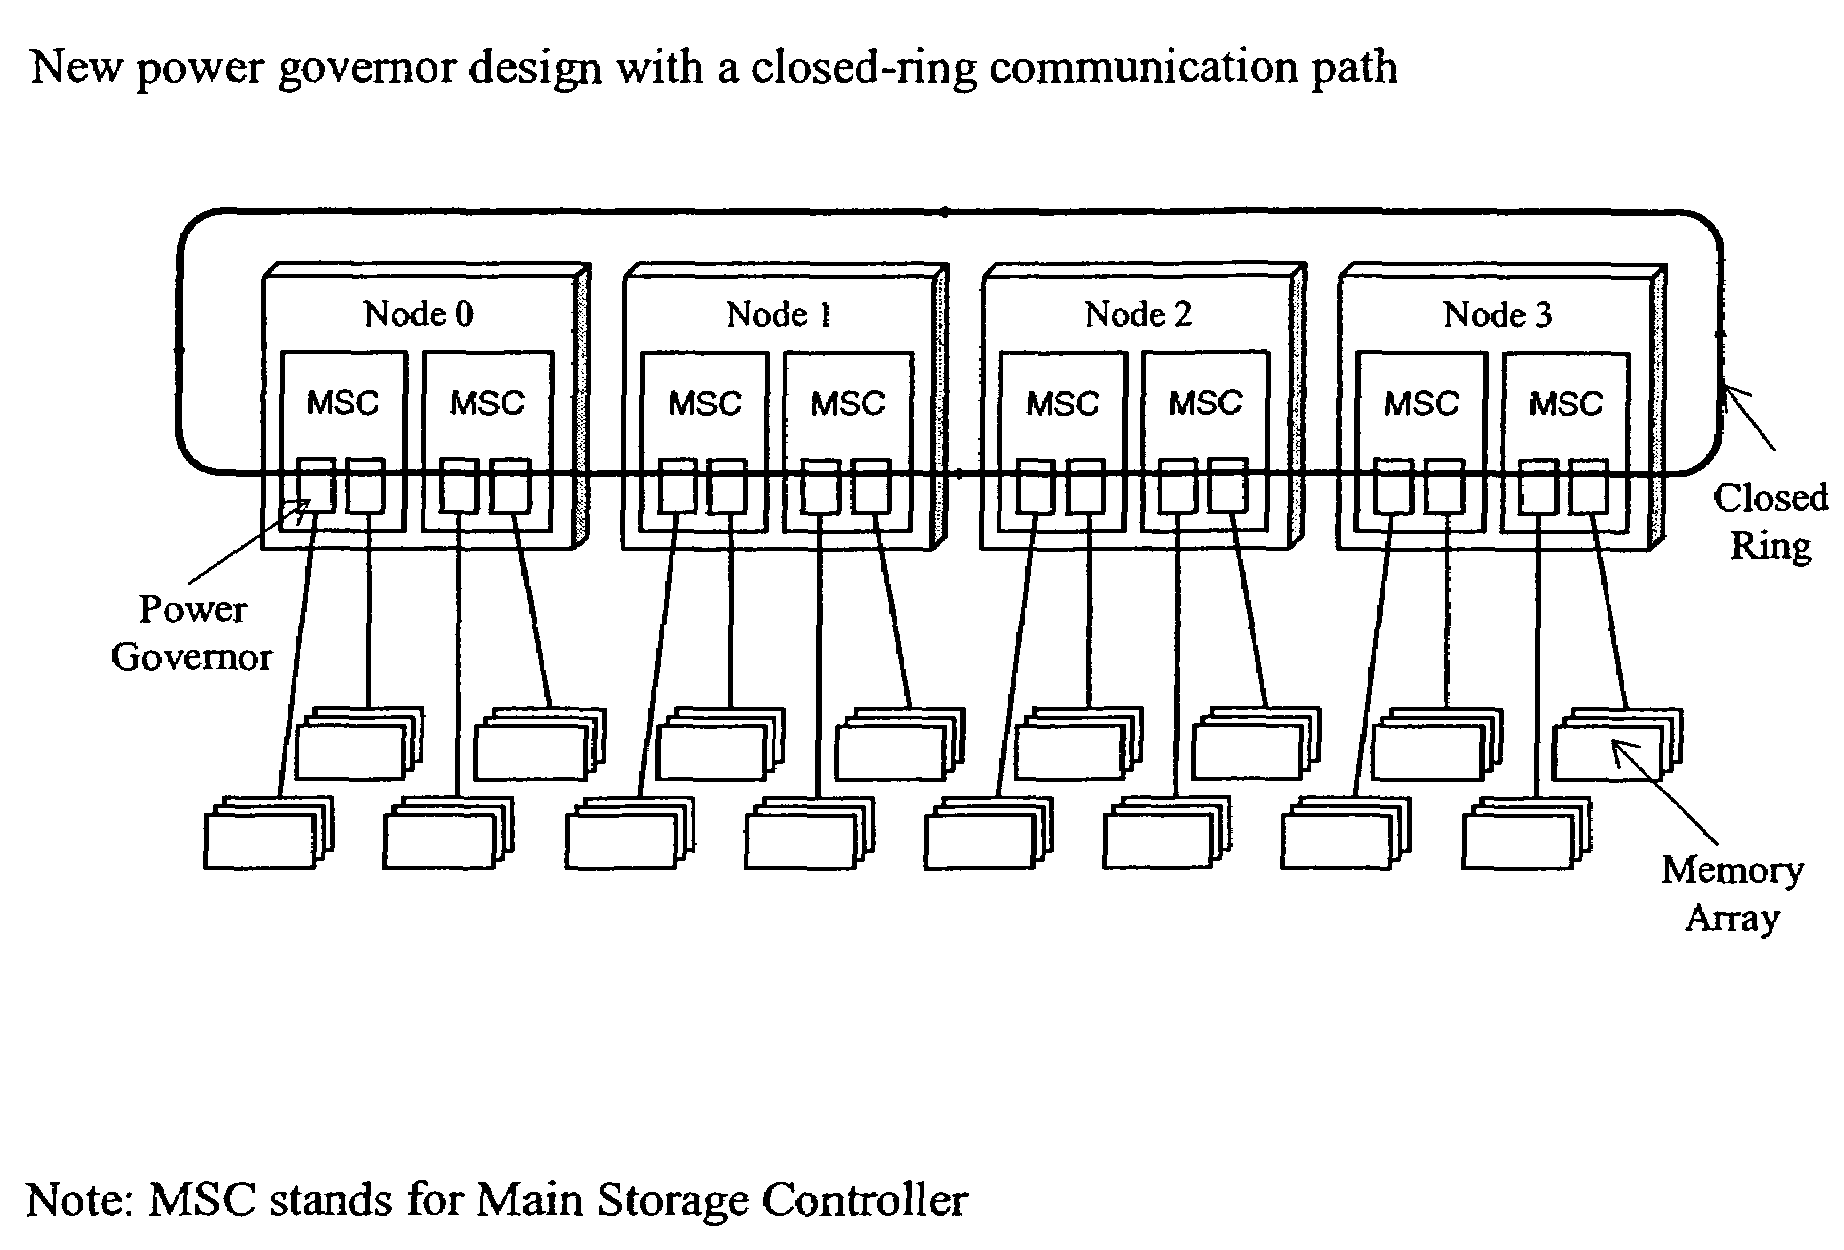 System and method for regulating system power by controlling memory usage based on an overall system power measurement